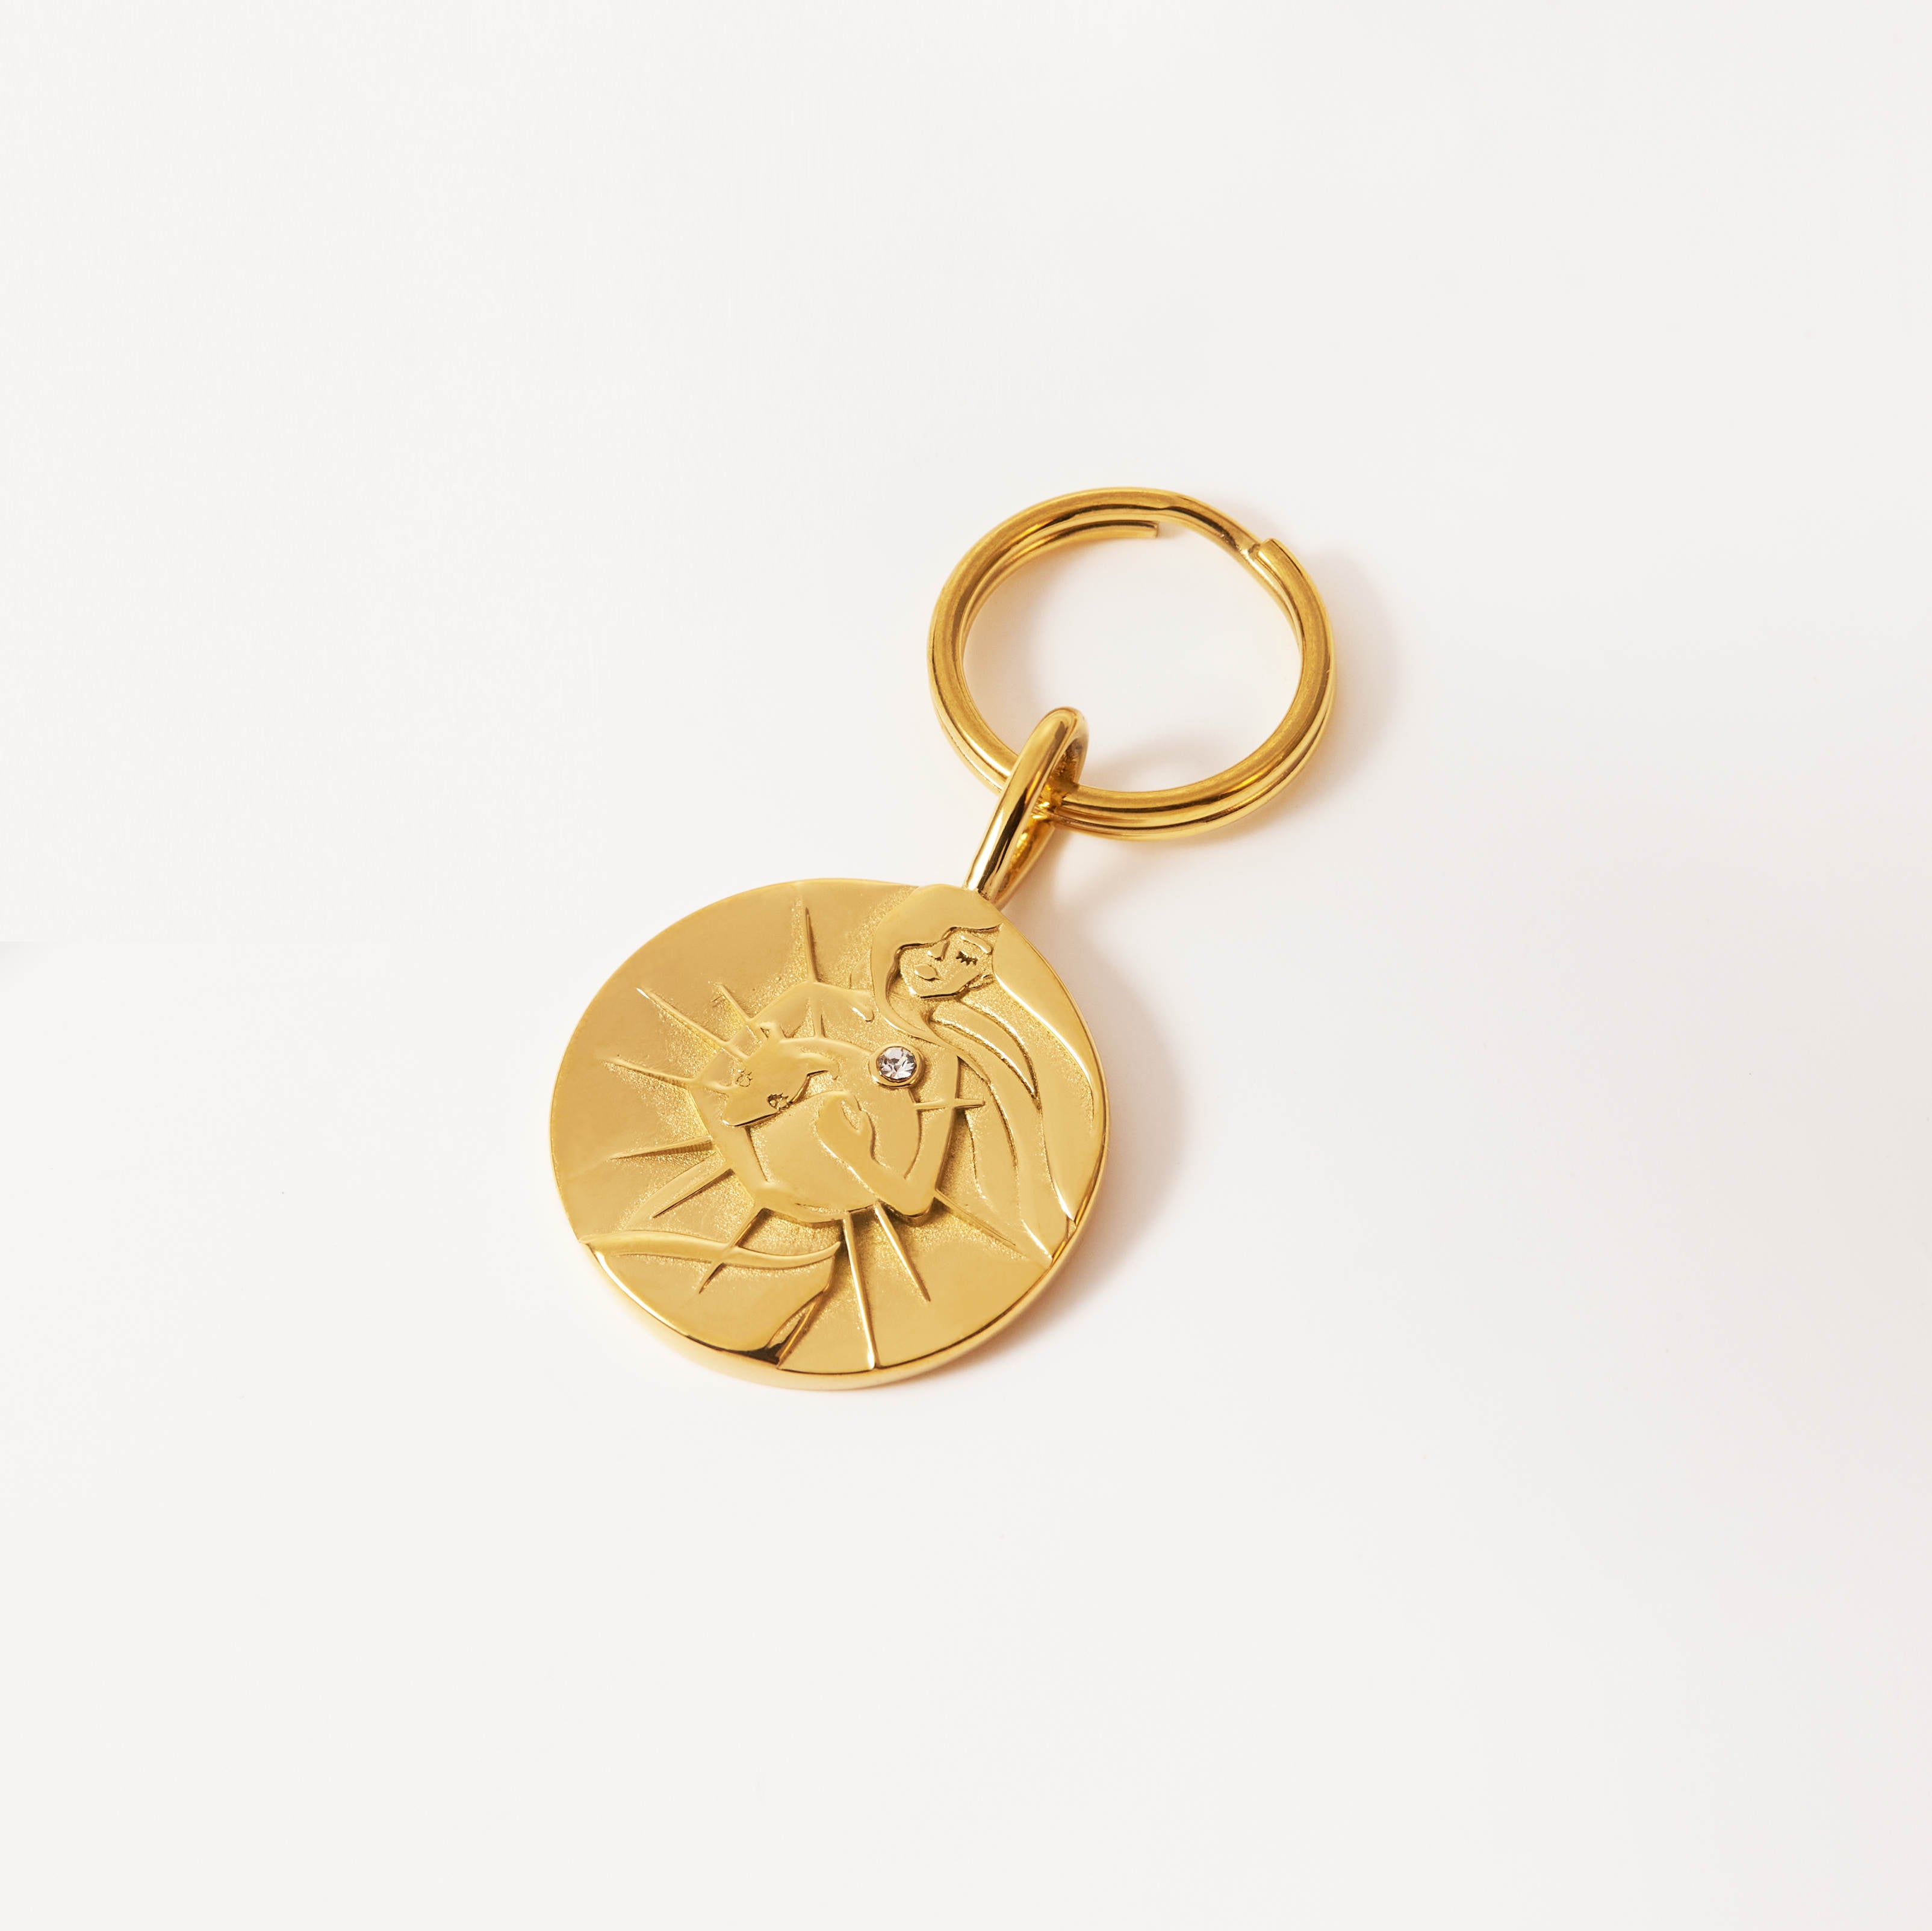 you found me. x 18k yellow Gold plated, or Stainless steel pendant on a split ring